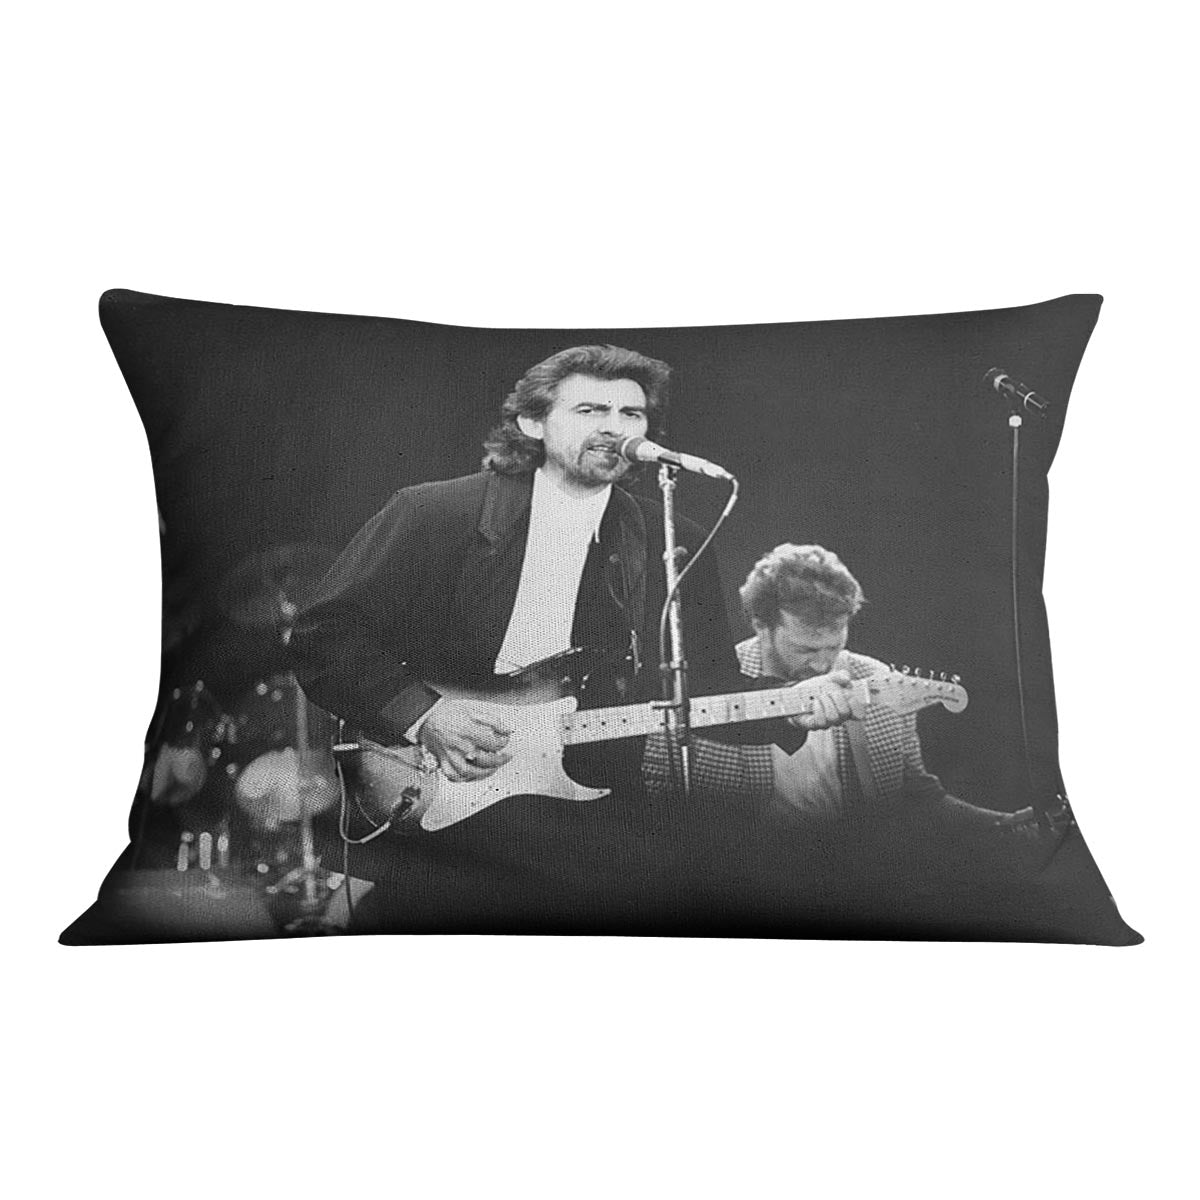 George Harrison at the Princes Trust concert in 1988 Cushion